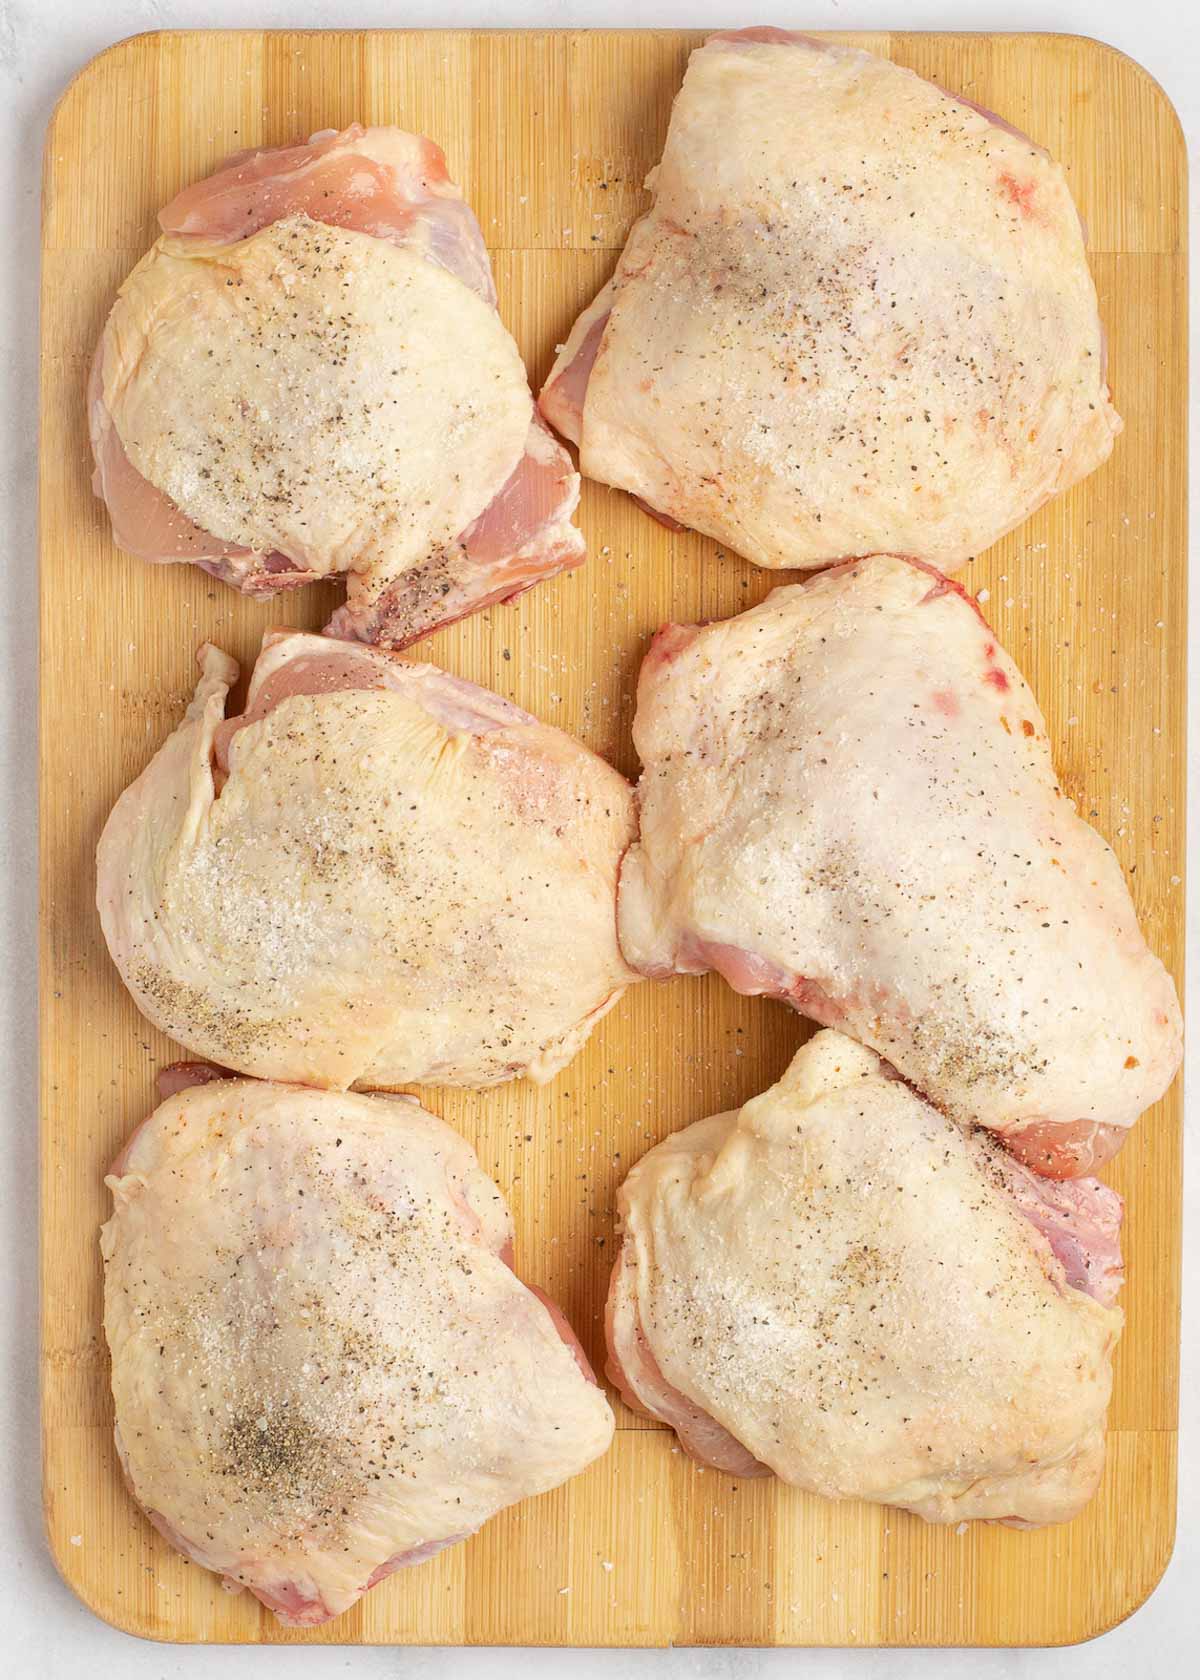 bone-in, skin-on chicken thighs seasoned with salt and pepper on a cutting board